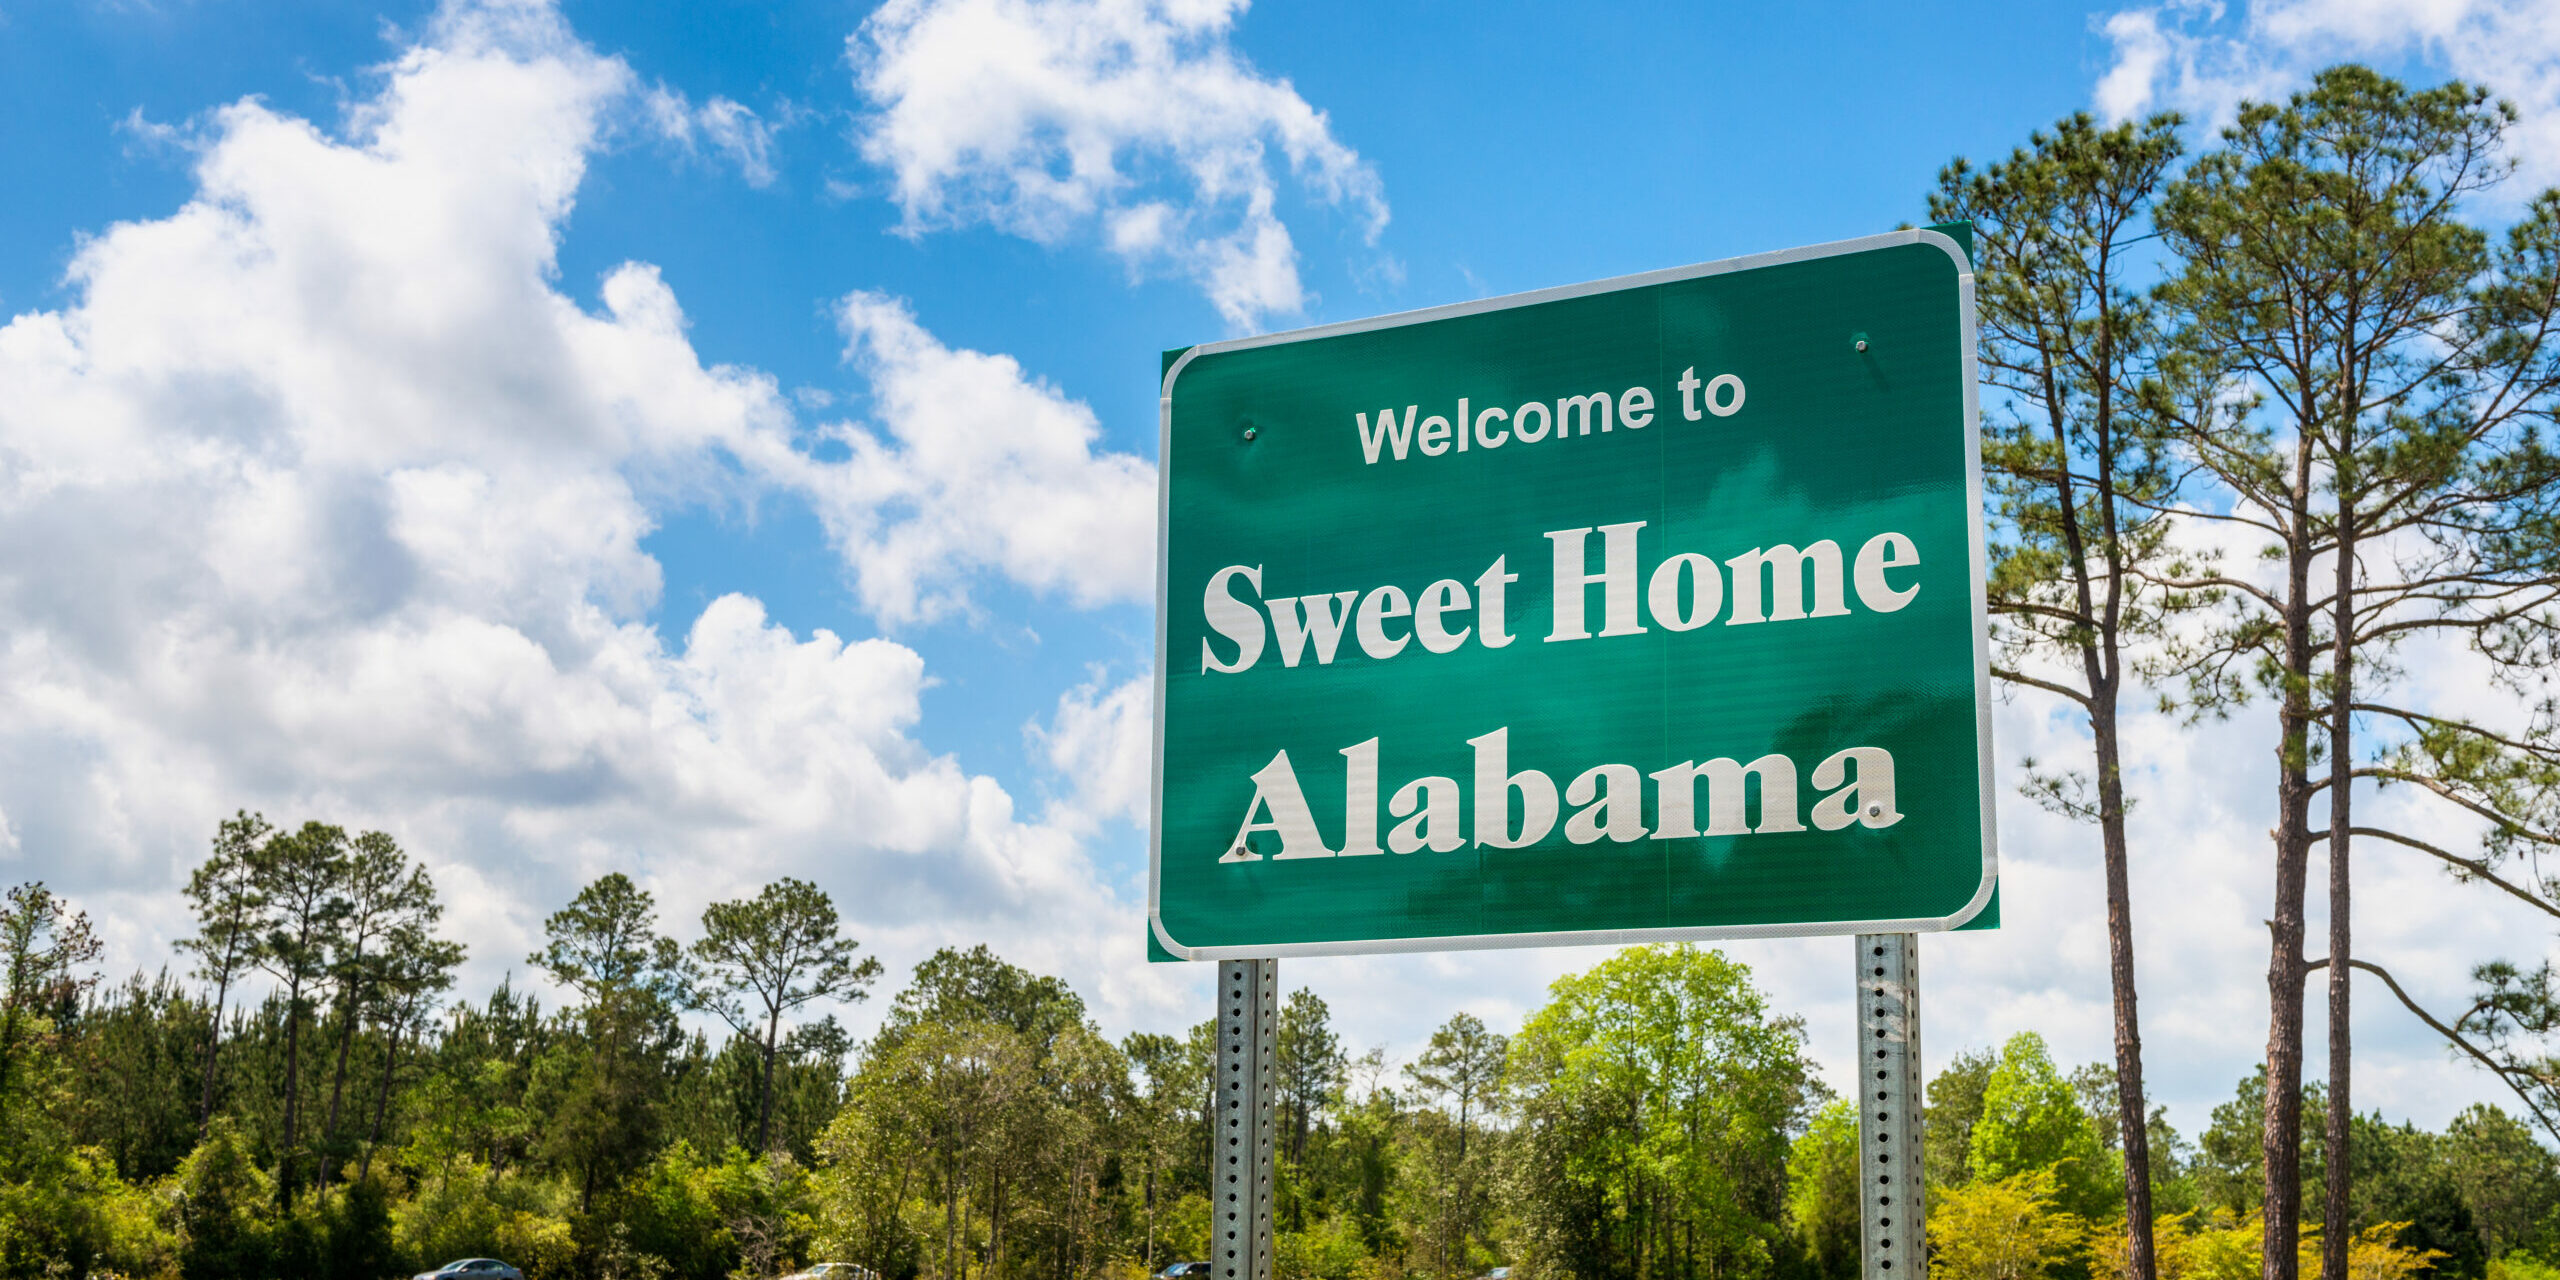 Welcome to Sweet Home Alabama Road Sign along Interstate 10 in Robertsdale, Alabama USA, near the State Border with Florida